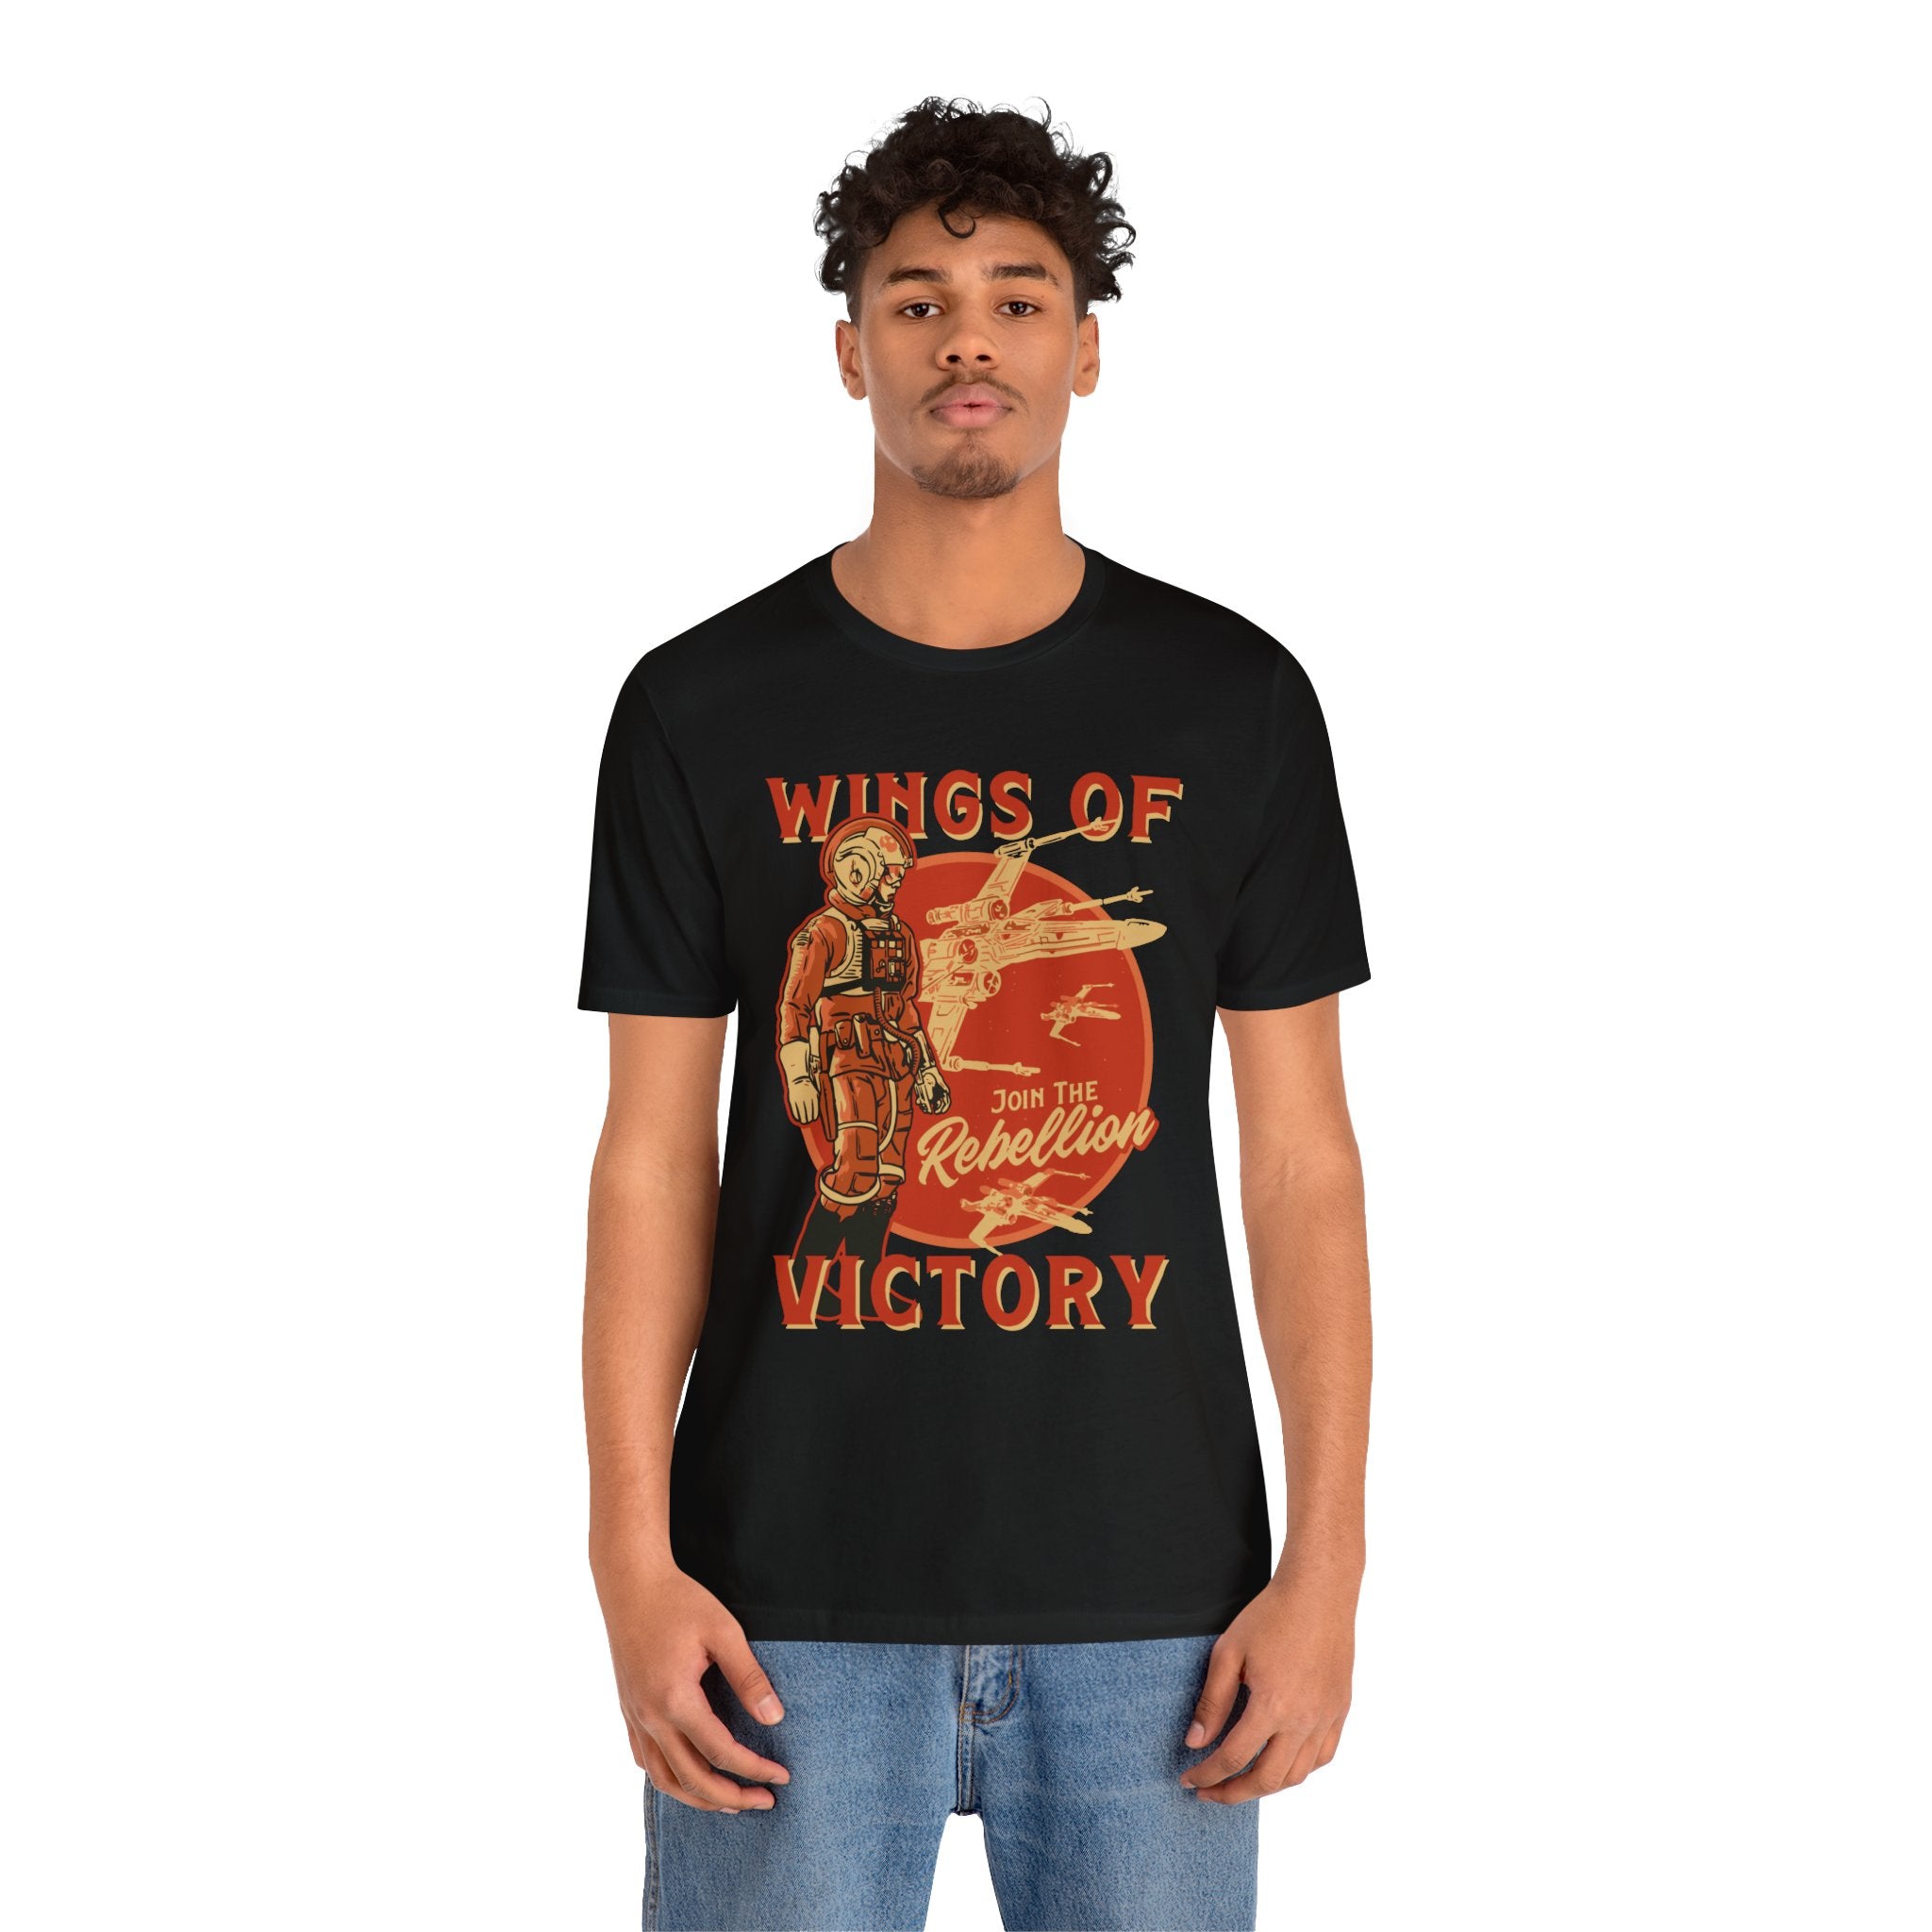 A young man wearing a black, soft cotton Wings of Victory T-Shirt with a quality print vintage "wings of rebellion victory" graphic design, paired with blue jeans.